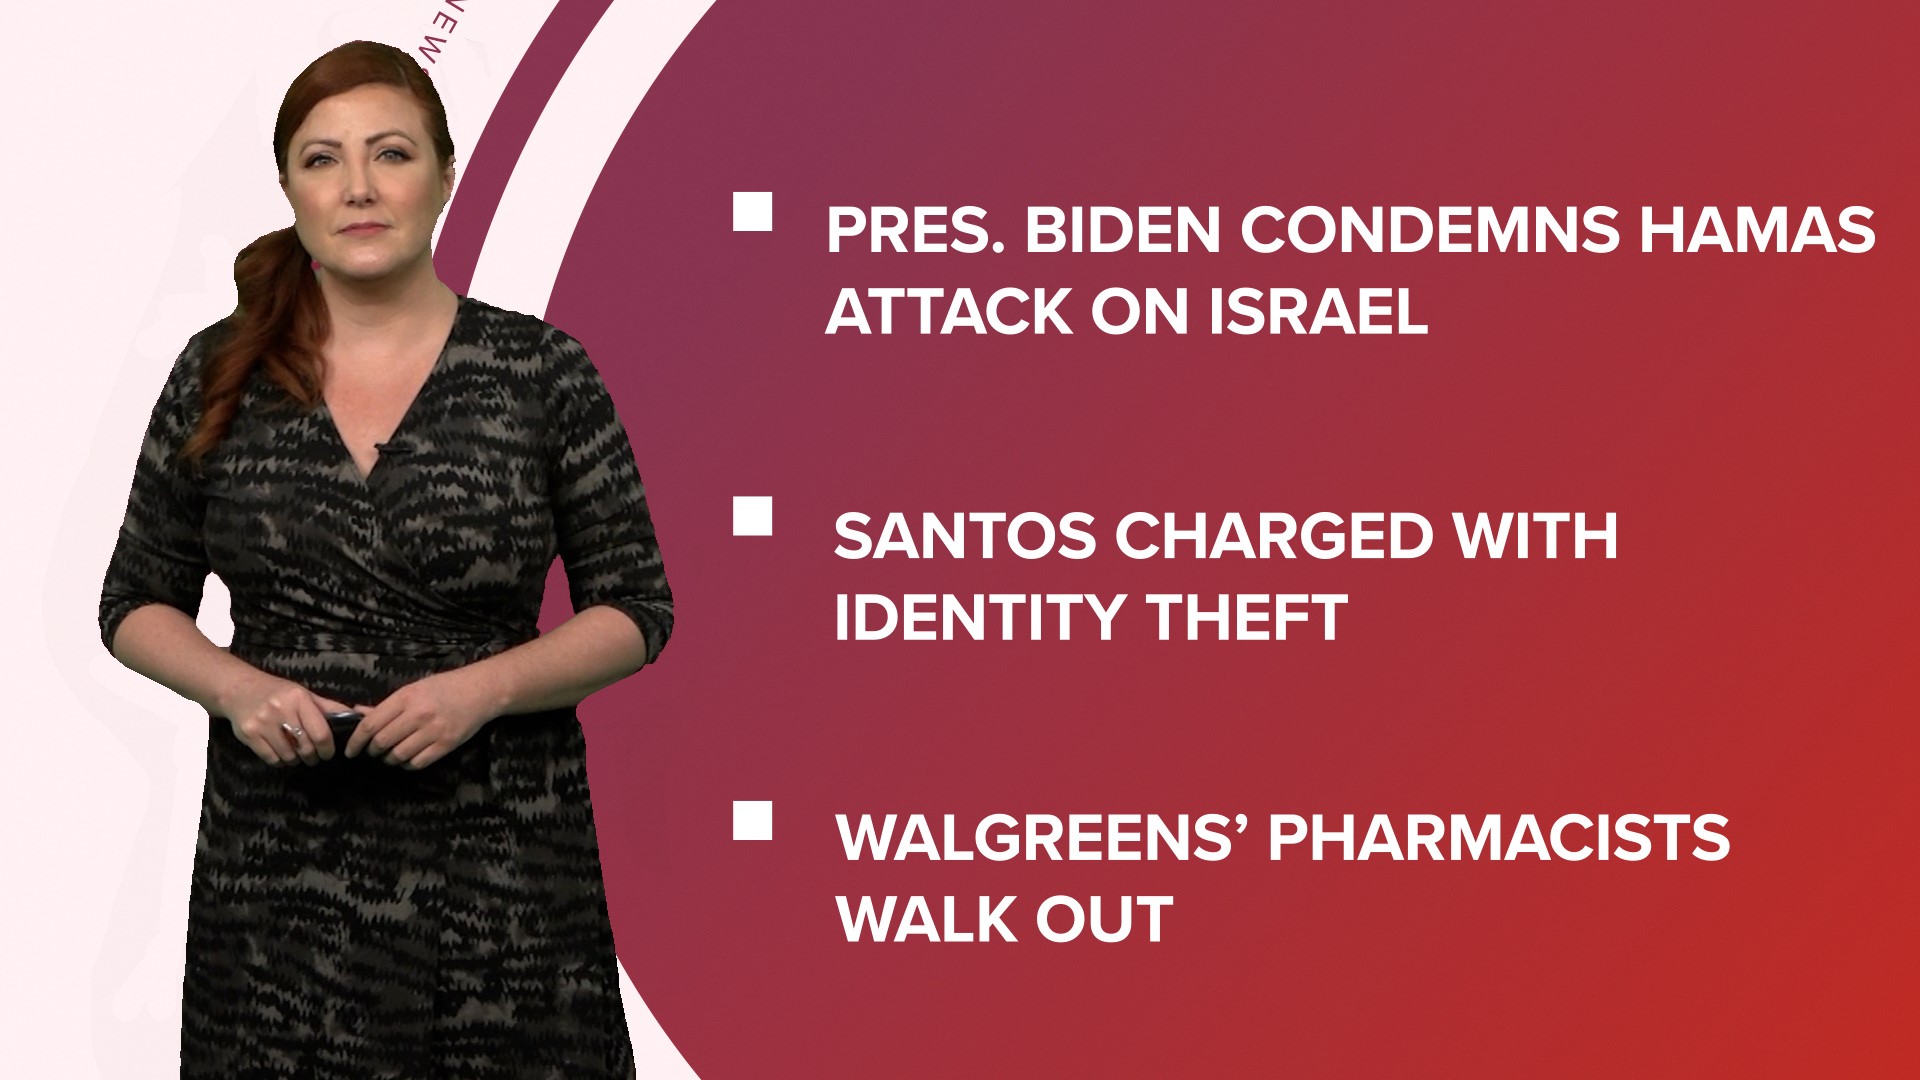 A look at what is happening in the news from President Biden condemning the attack on Israel and Walgreens' pharmacists walk out to Rep. George Santos charged.